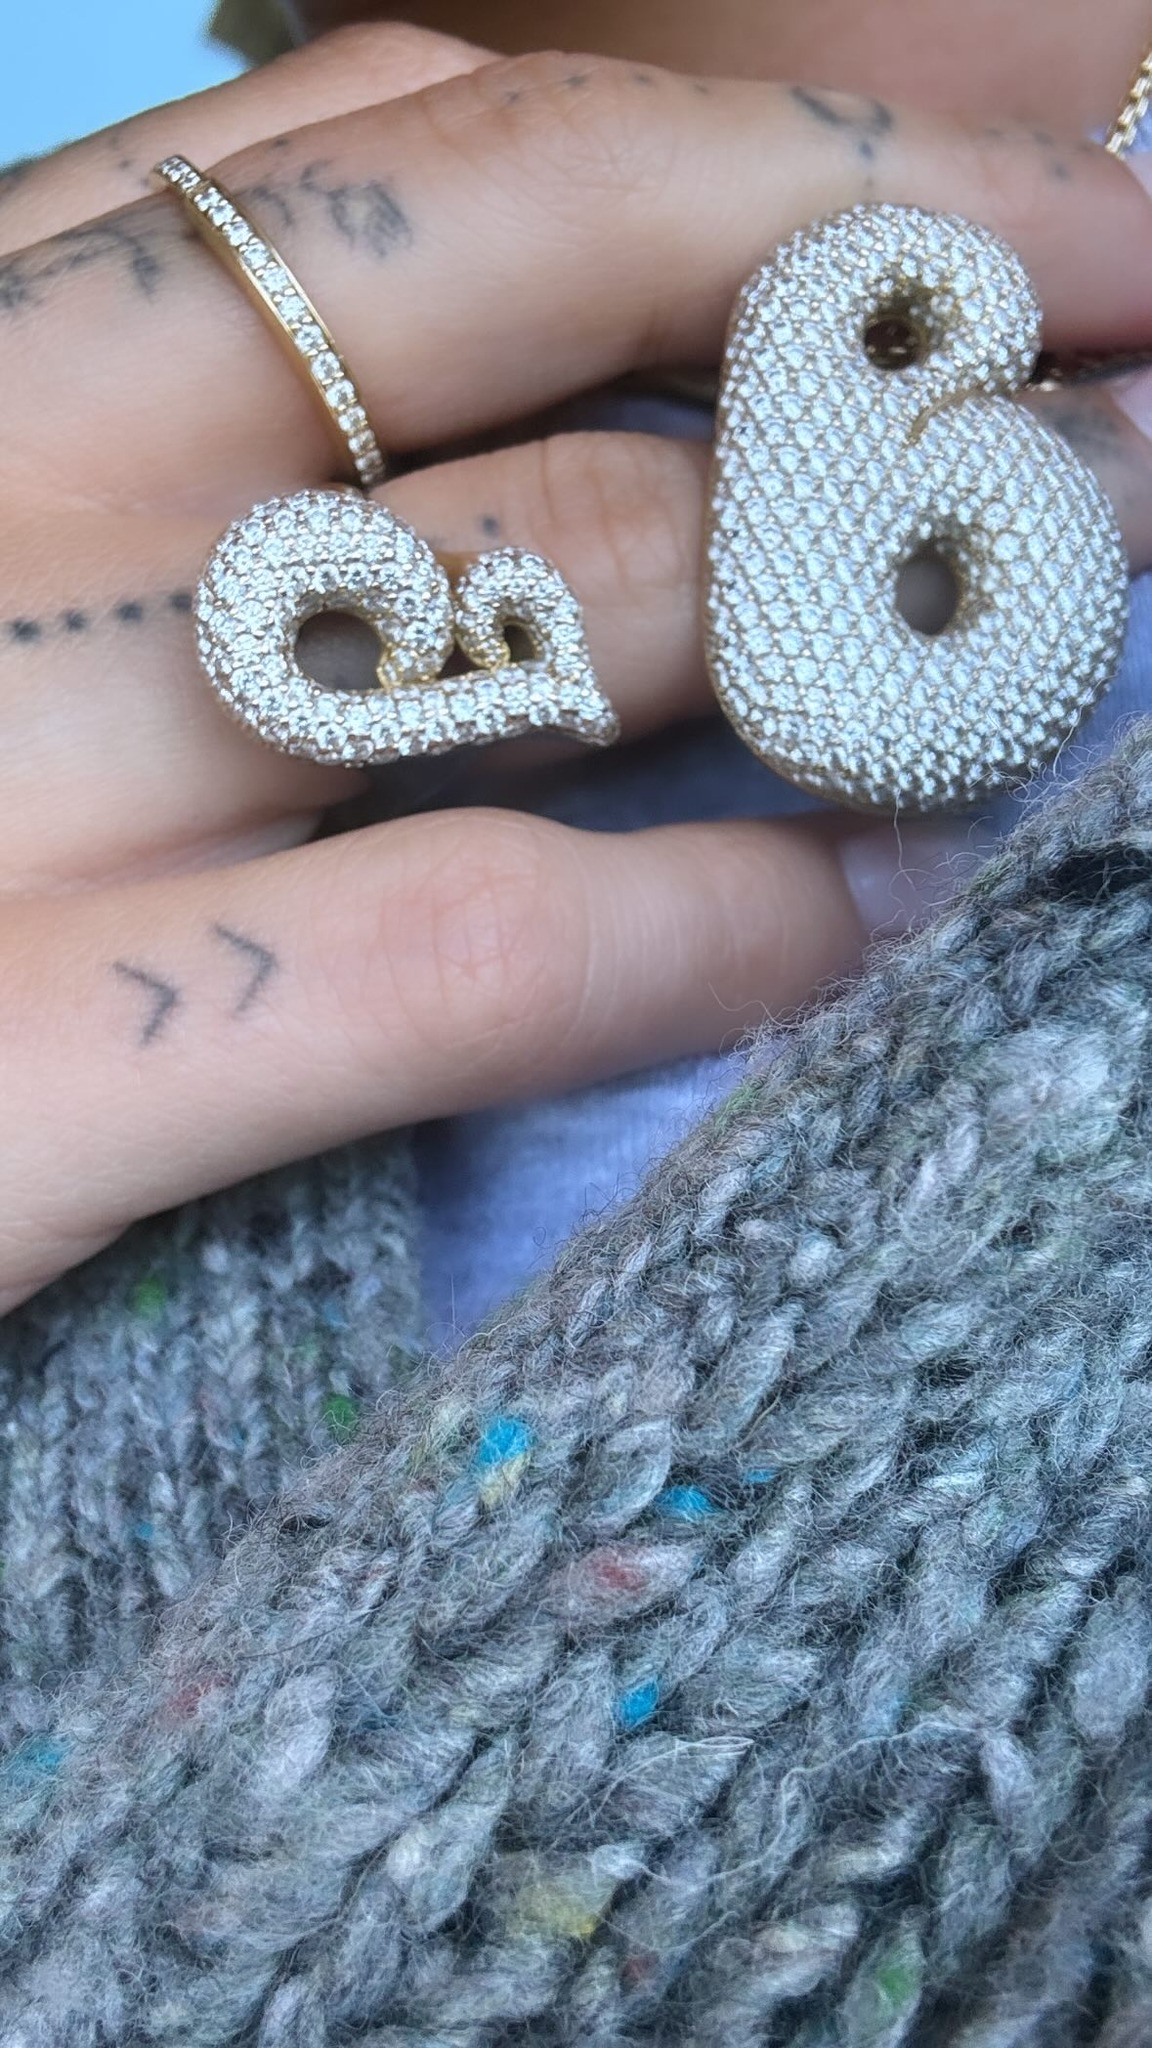 Hailey also flaunted a close-up of her massive diamond 'J' and 'B' rings